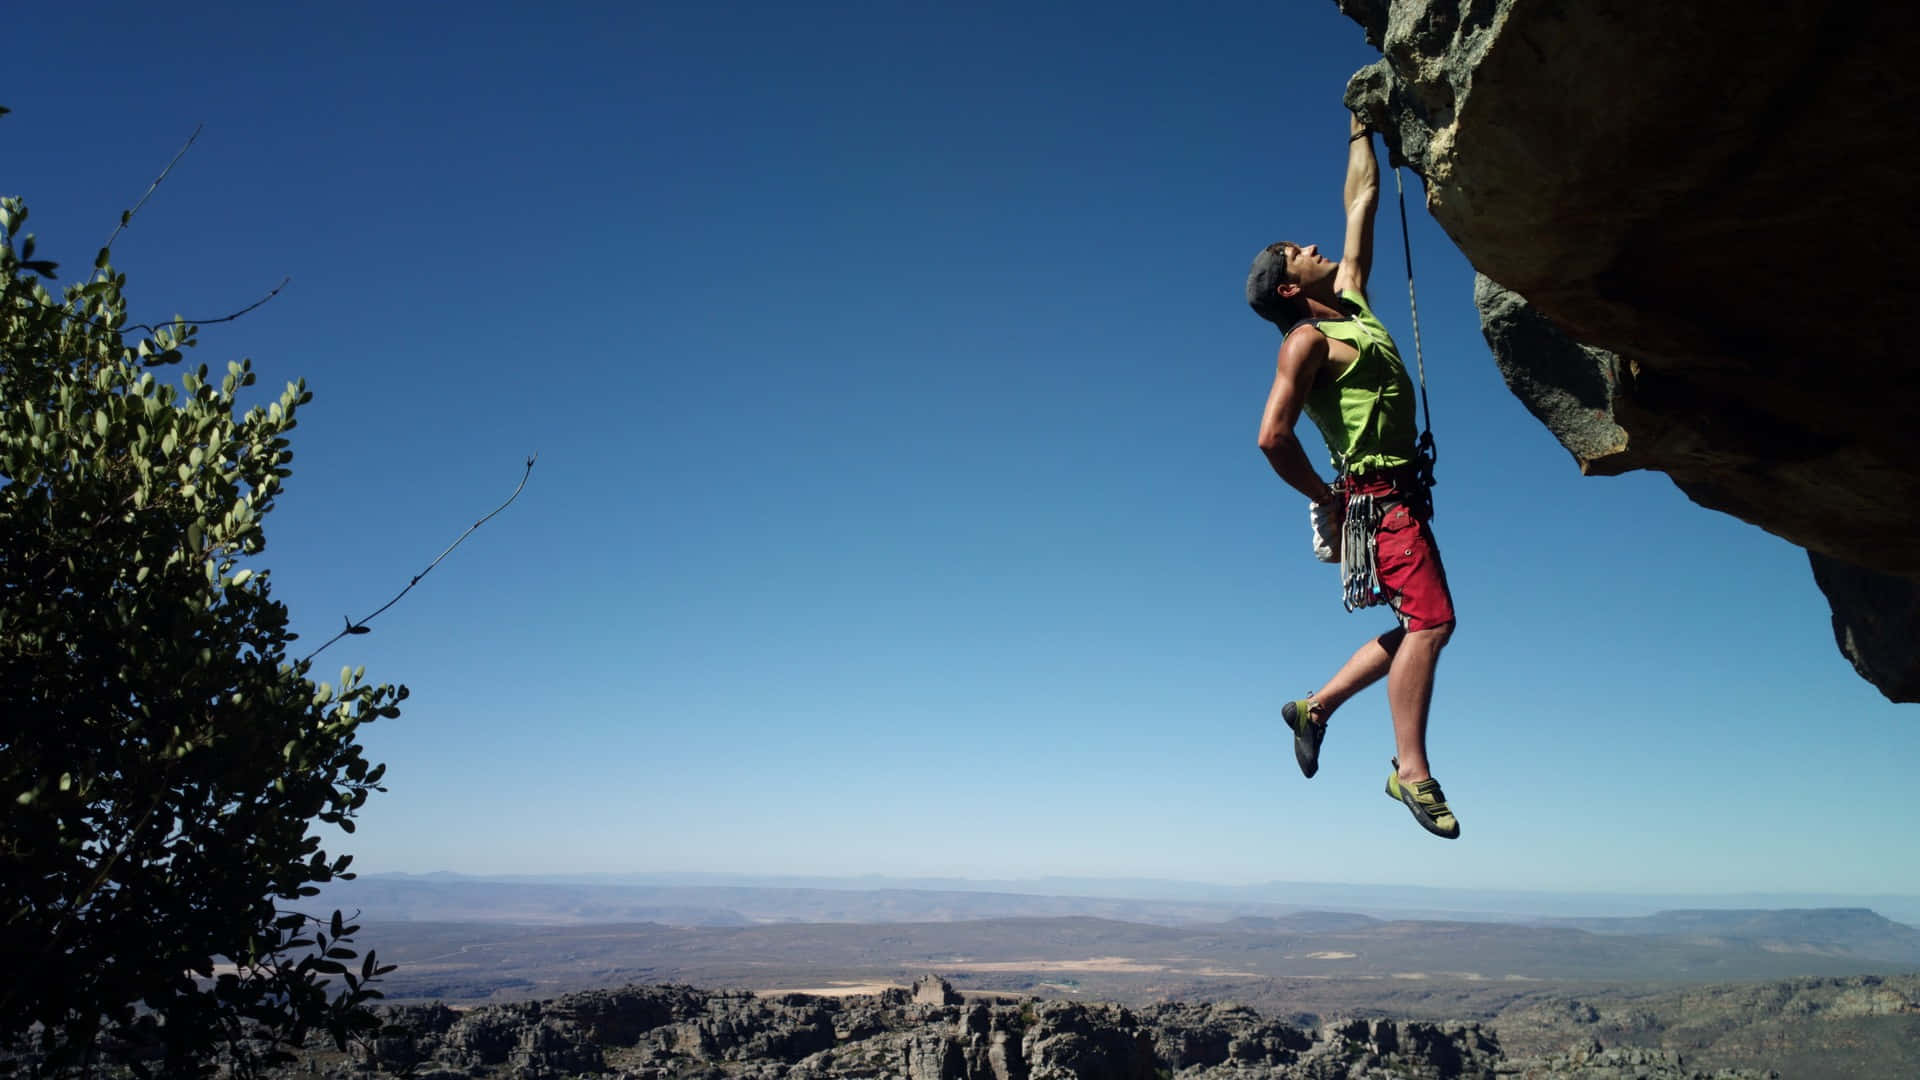 Reach New Heights - Climbing is a great way to push your boundaries and explore new challenges